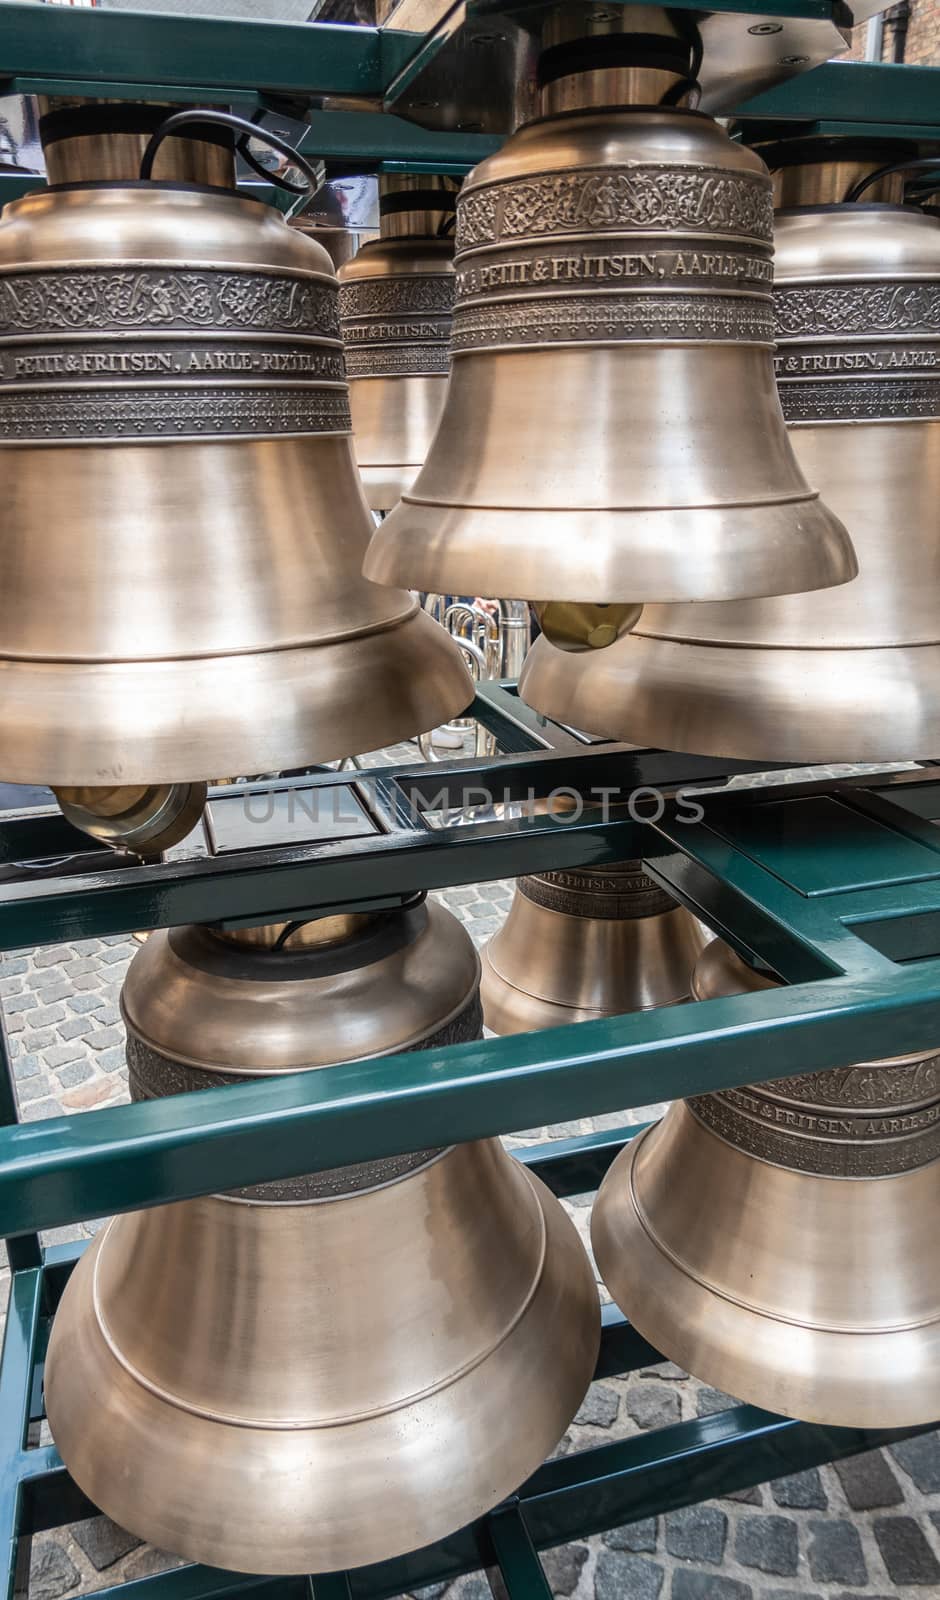 Petit and Fritsen bells of carillon in Bruges, Flanders, Belgium by Claudine